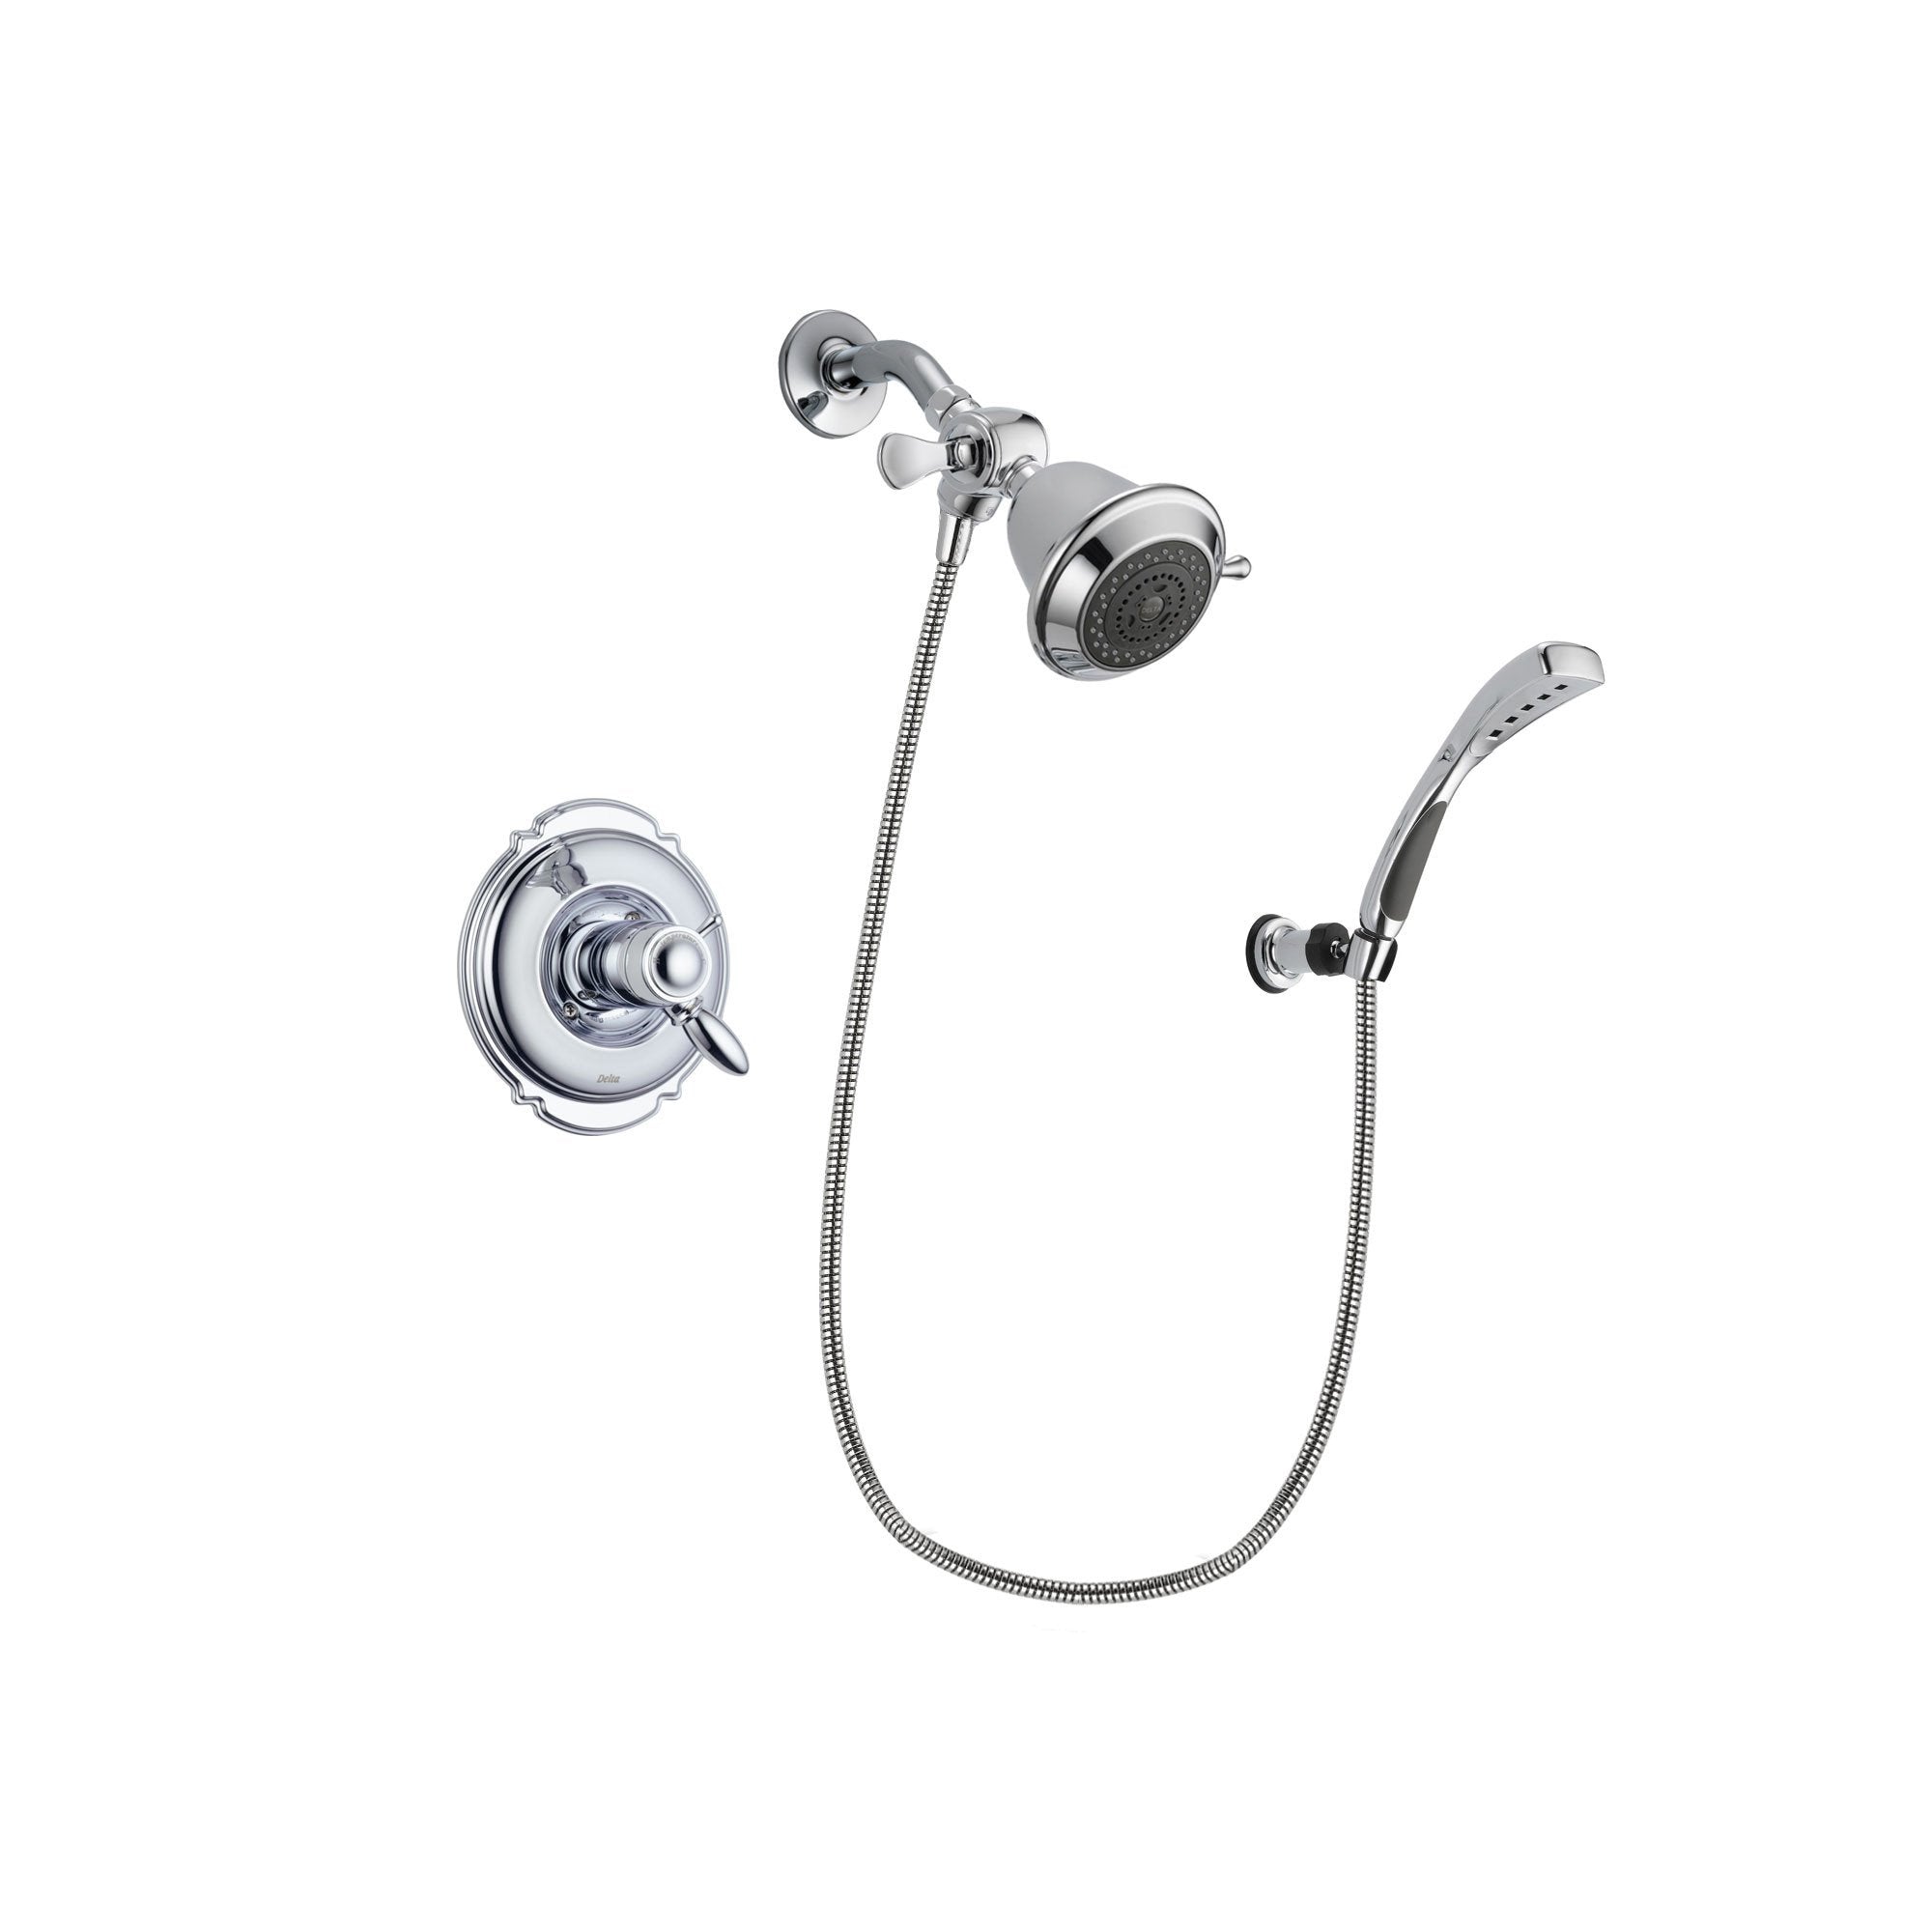 Delta Victorian Chrome Finish Thermostatic Shower Faucet System Package with Shower Head and Wall-Mount Bracket with Handheld Shower Spray Includes Rough-in Valve DSP0972V